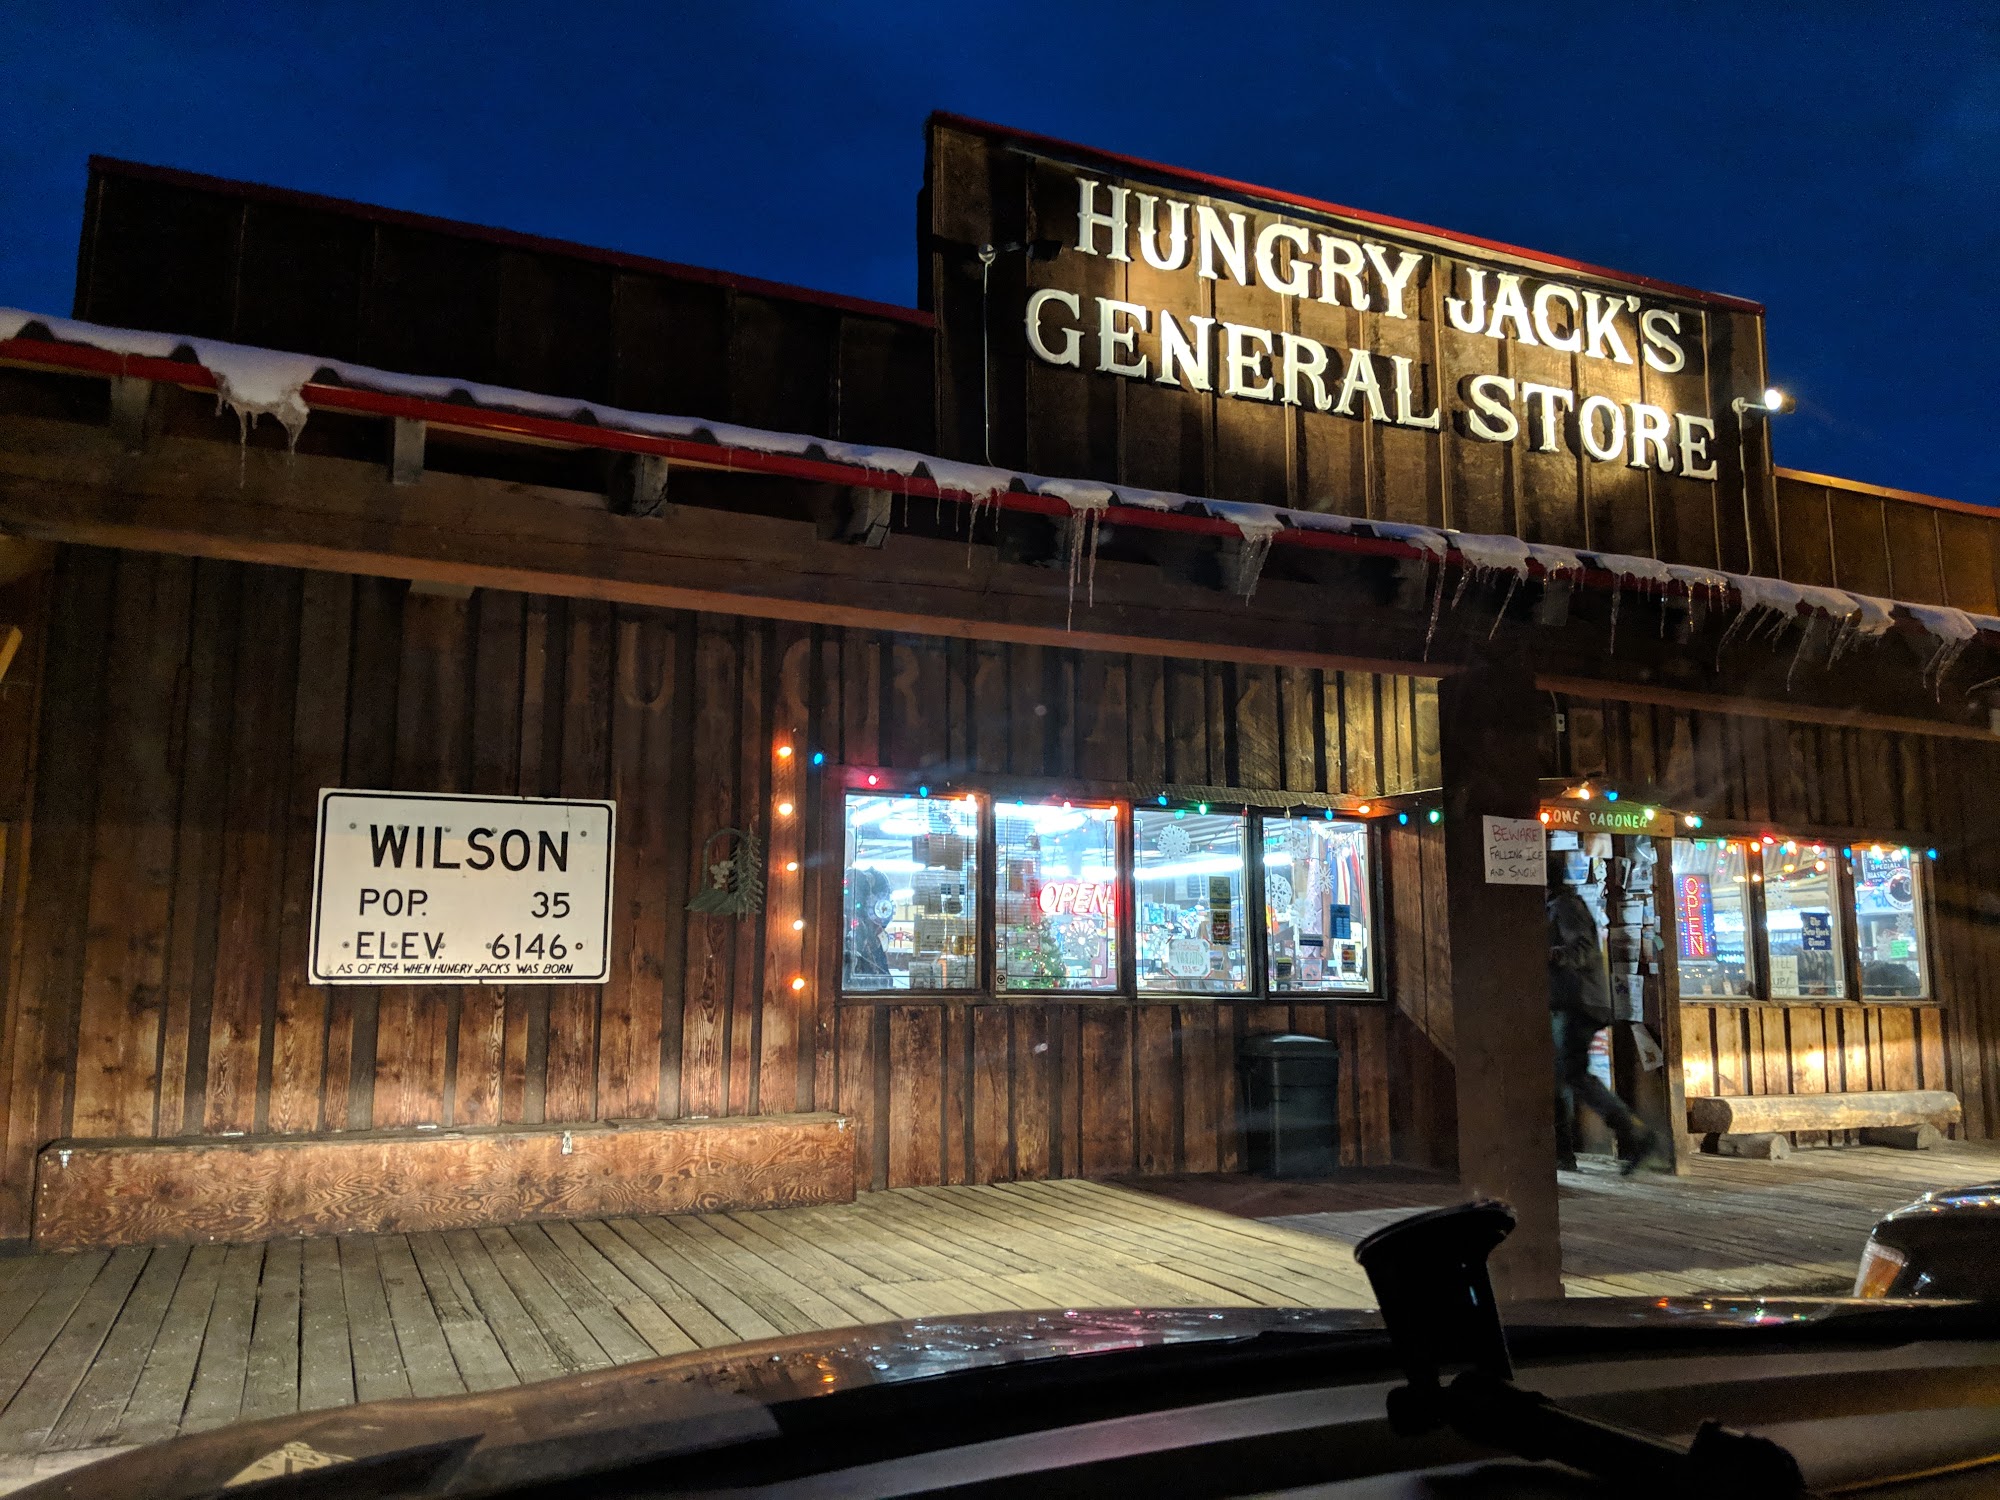 Hungry Jack's General Store